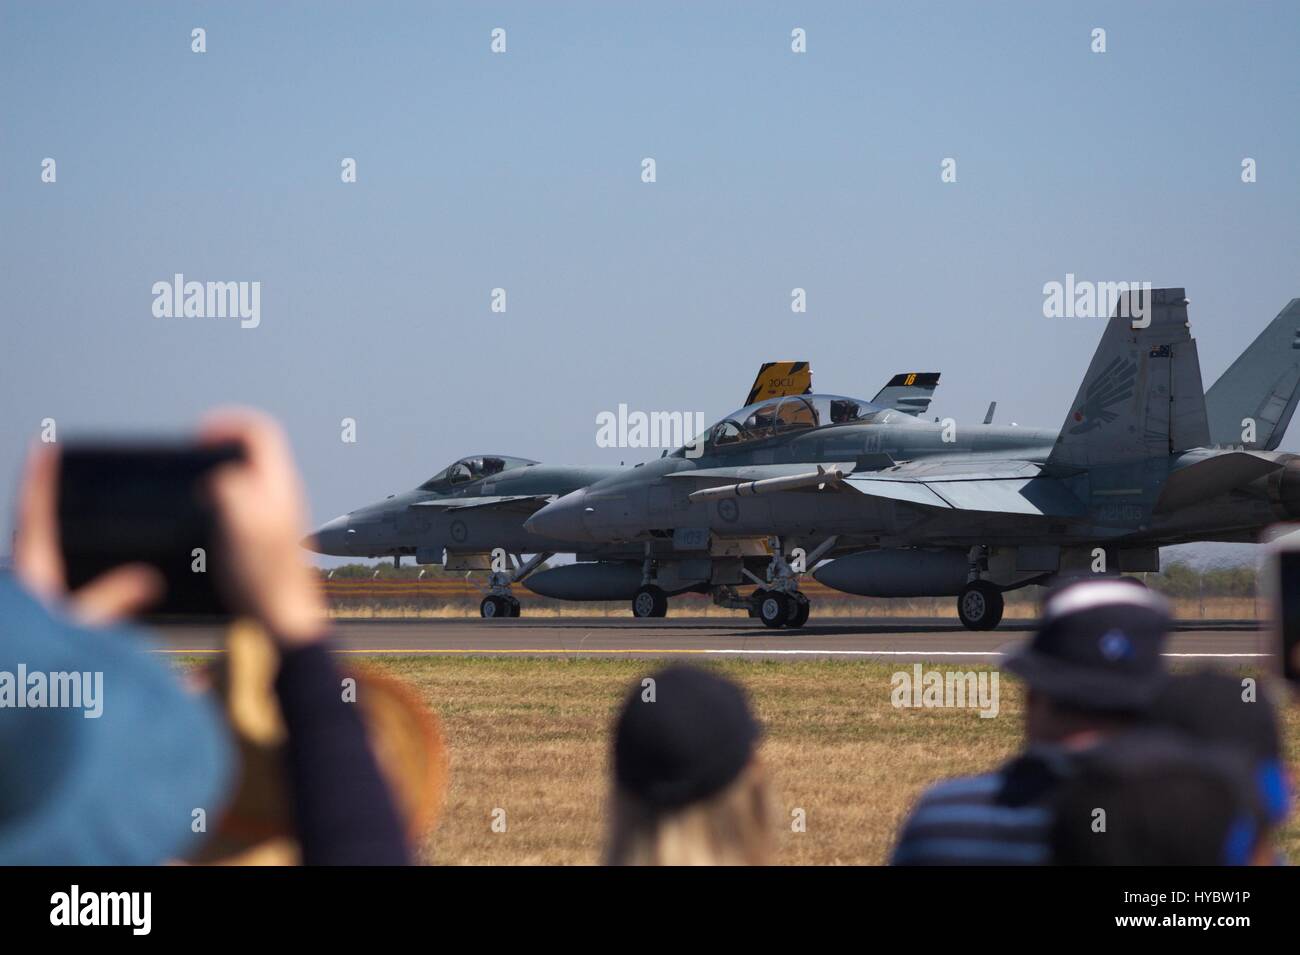 F/A-18F Super Hornet on the runway at Avalon airshow 2017, crowd in front holding up a phone or camera to video the event. Stock Photo